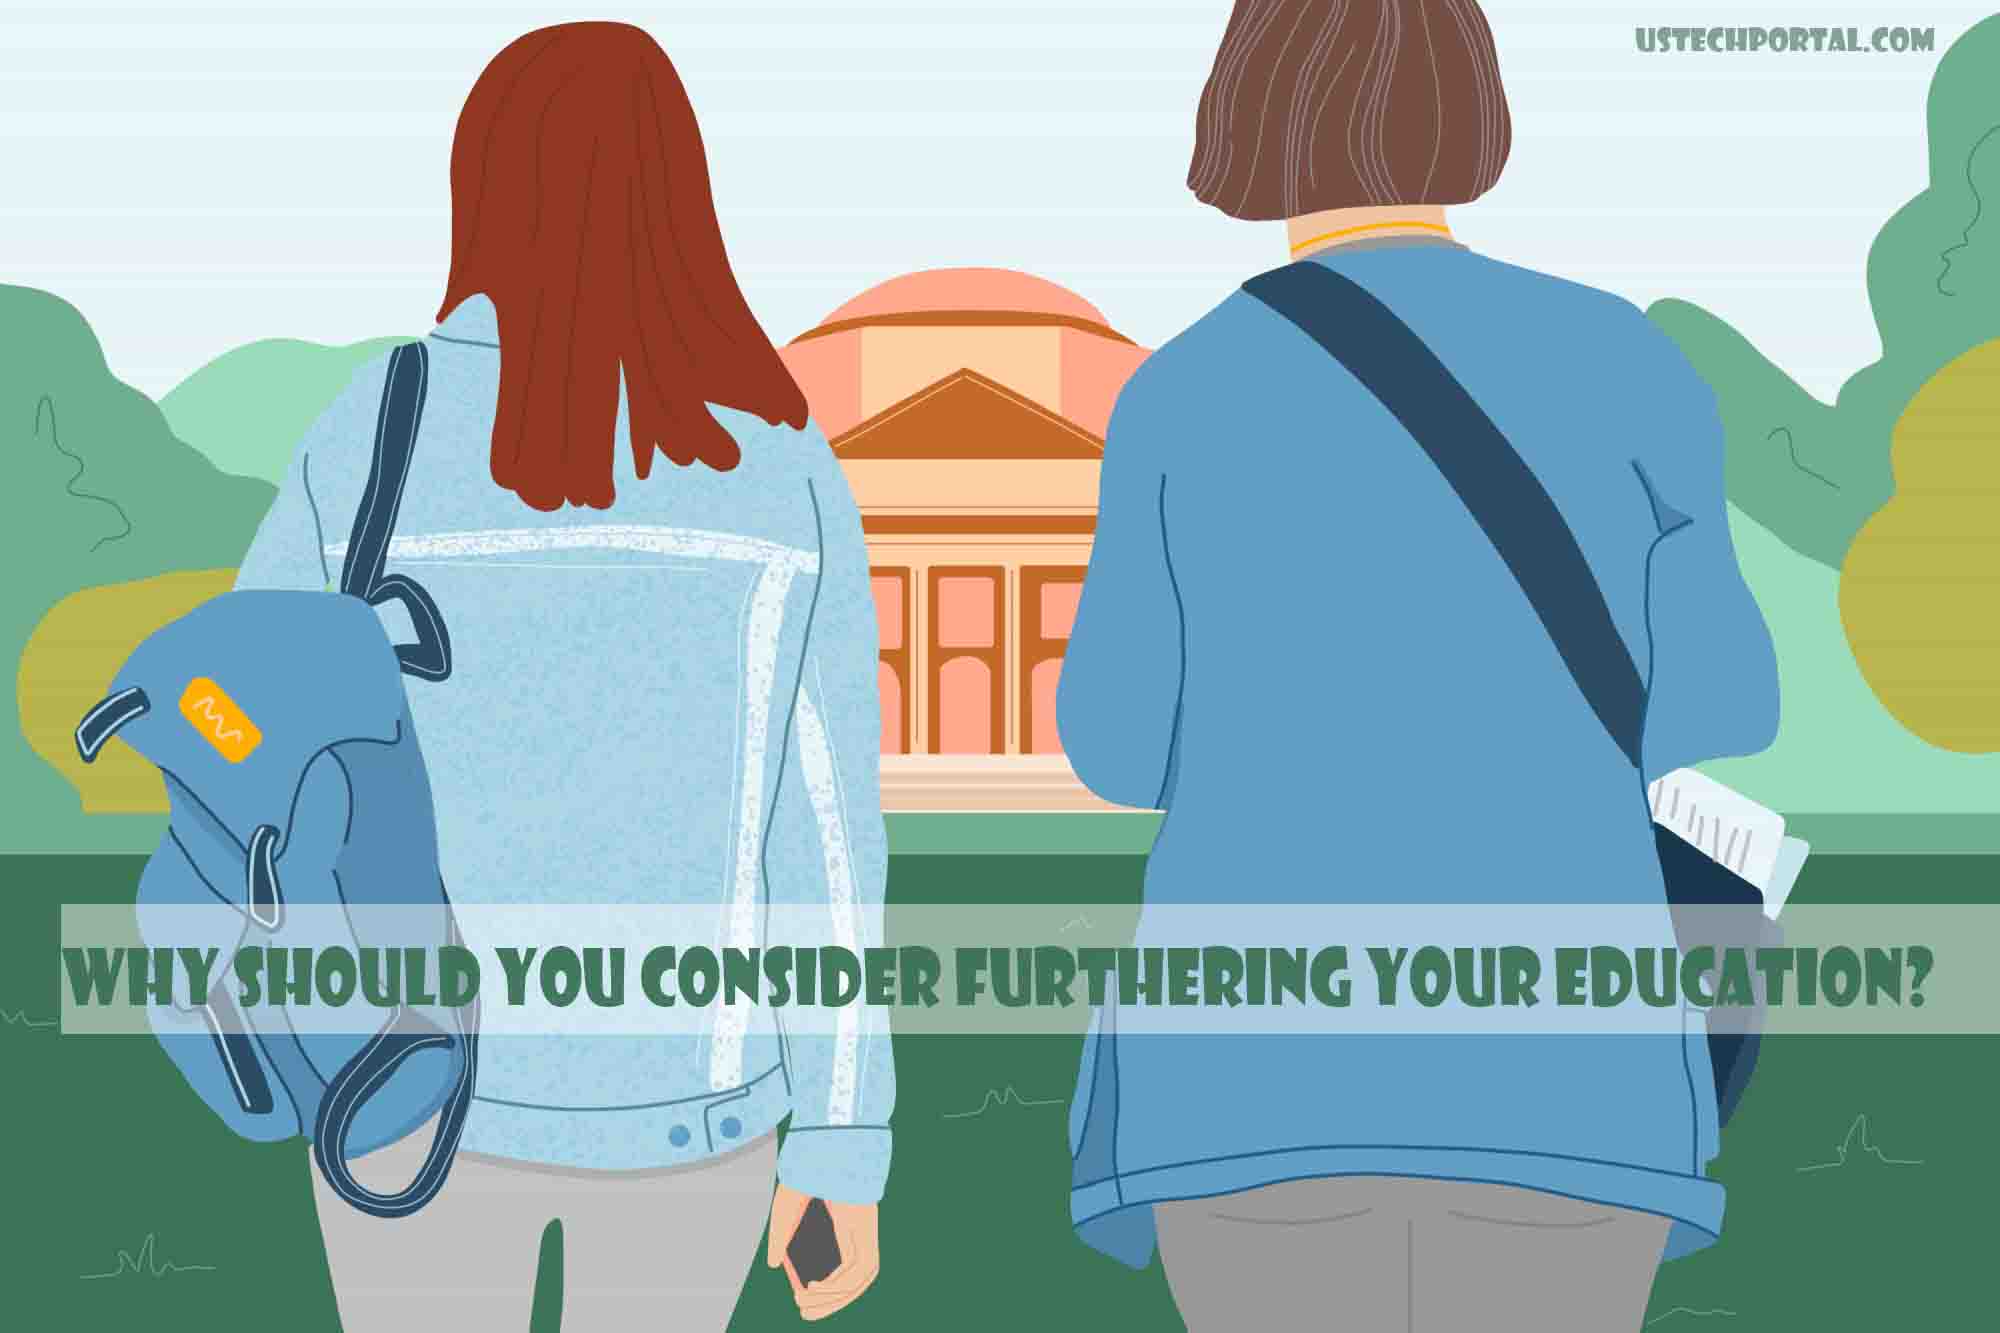 Why Should You Consider Furthering Your Education?